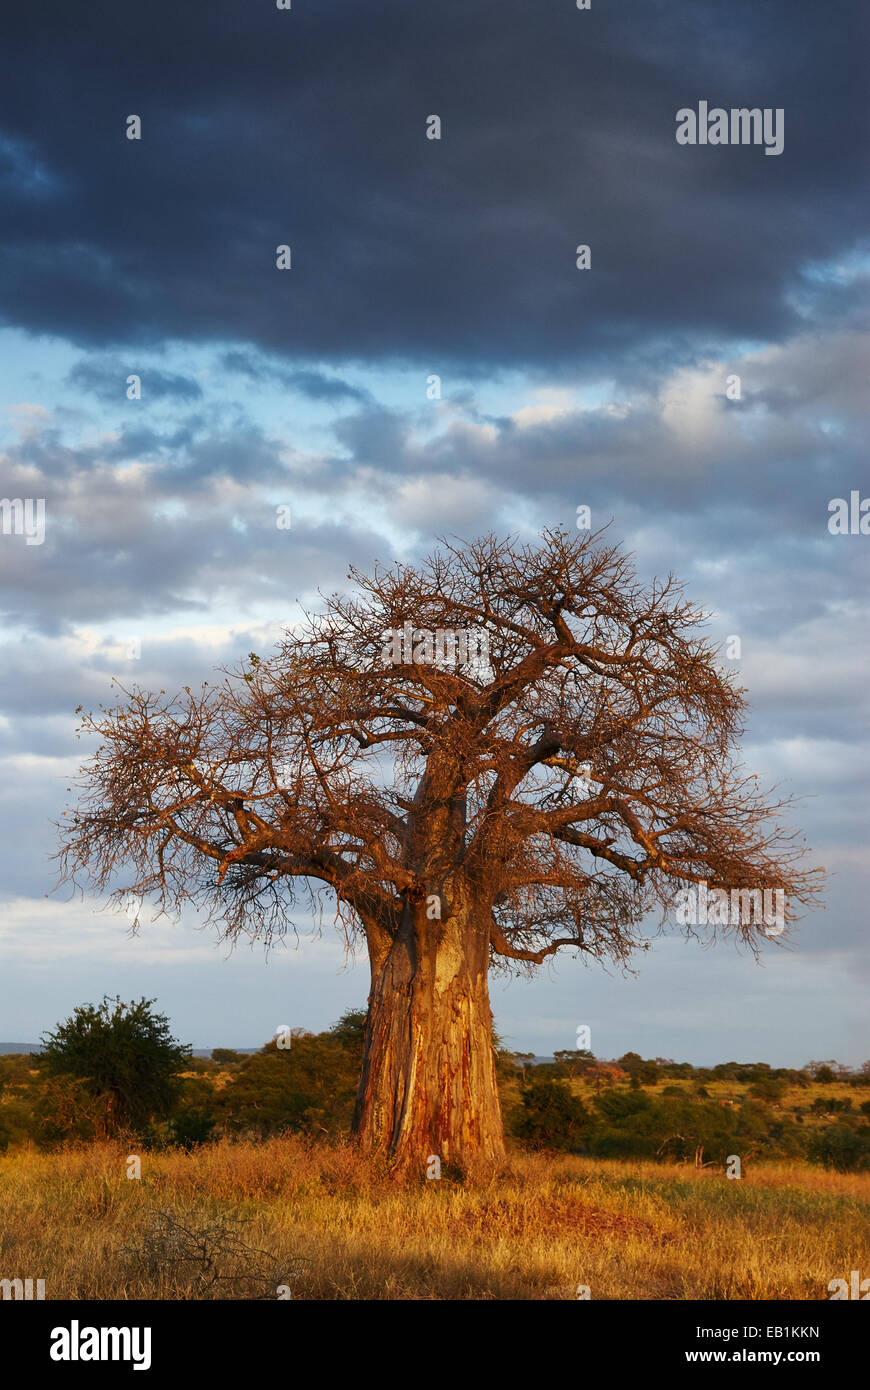 African landscape with a big baobab tree, in vertical Stock Photo